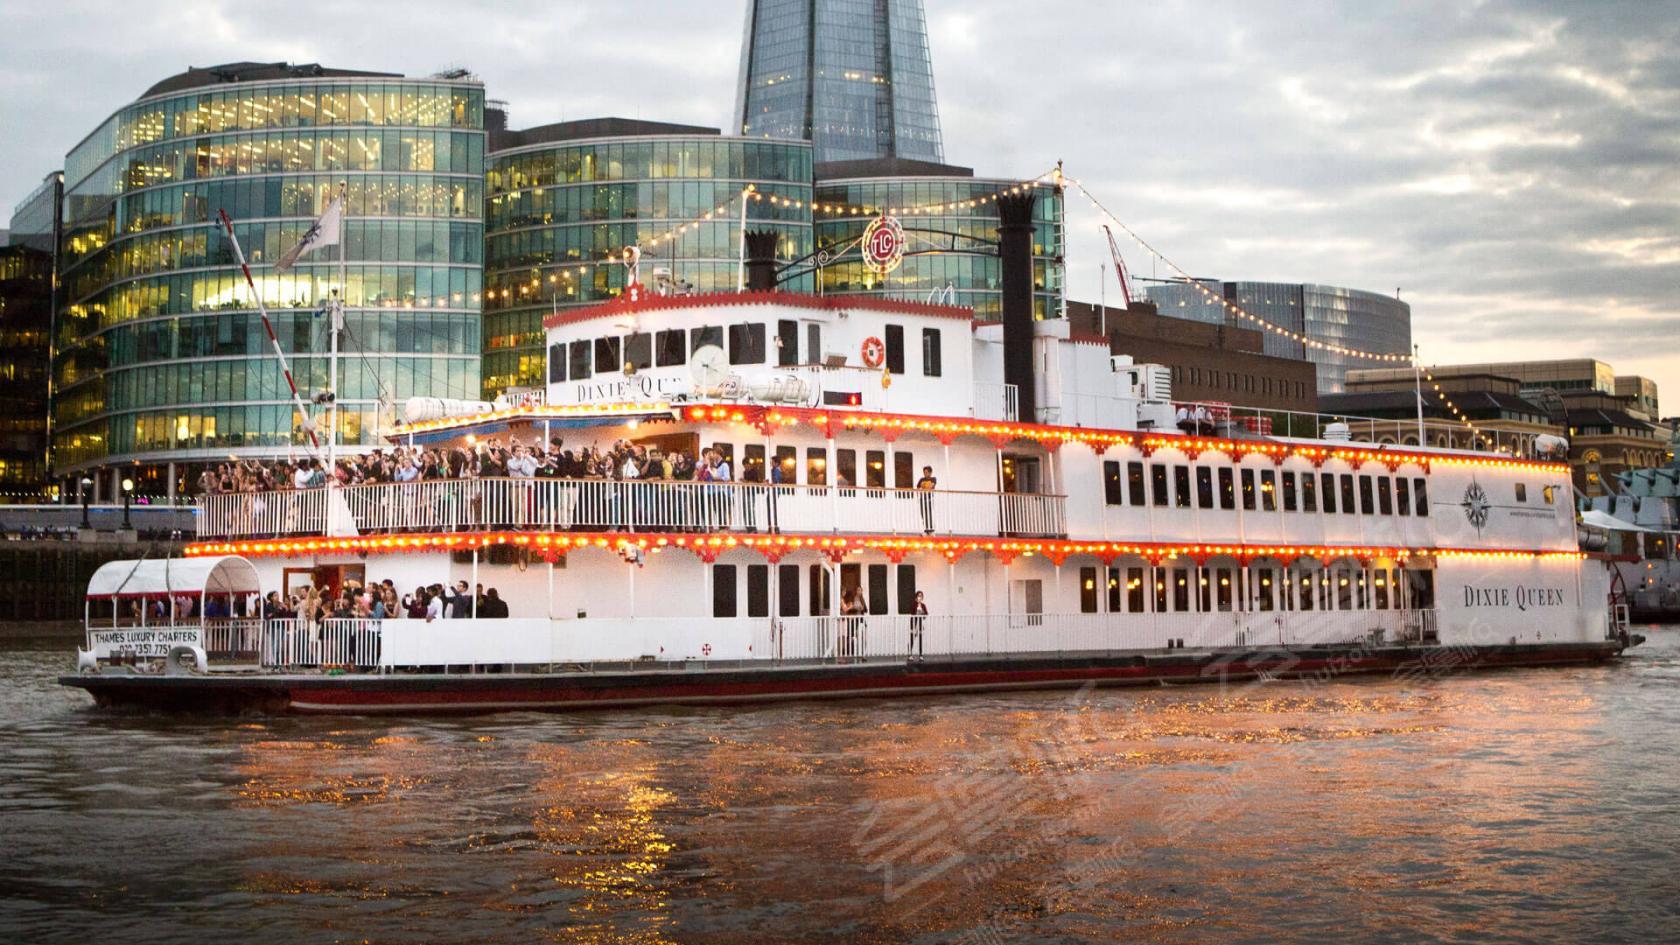 Dixie Queen – Thames Luxury Charters